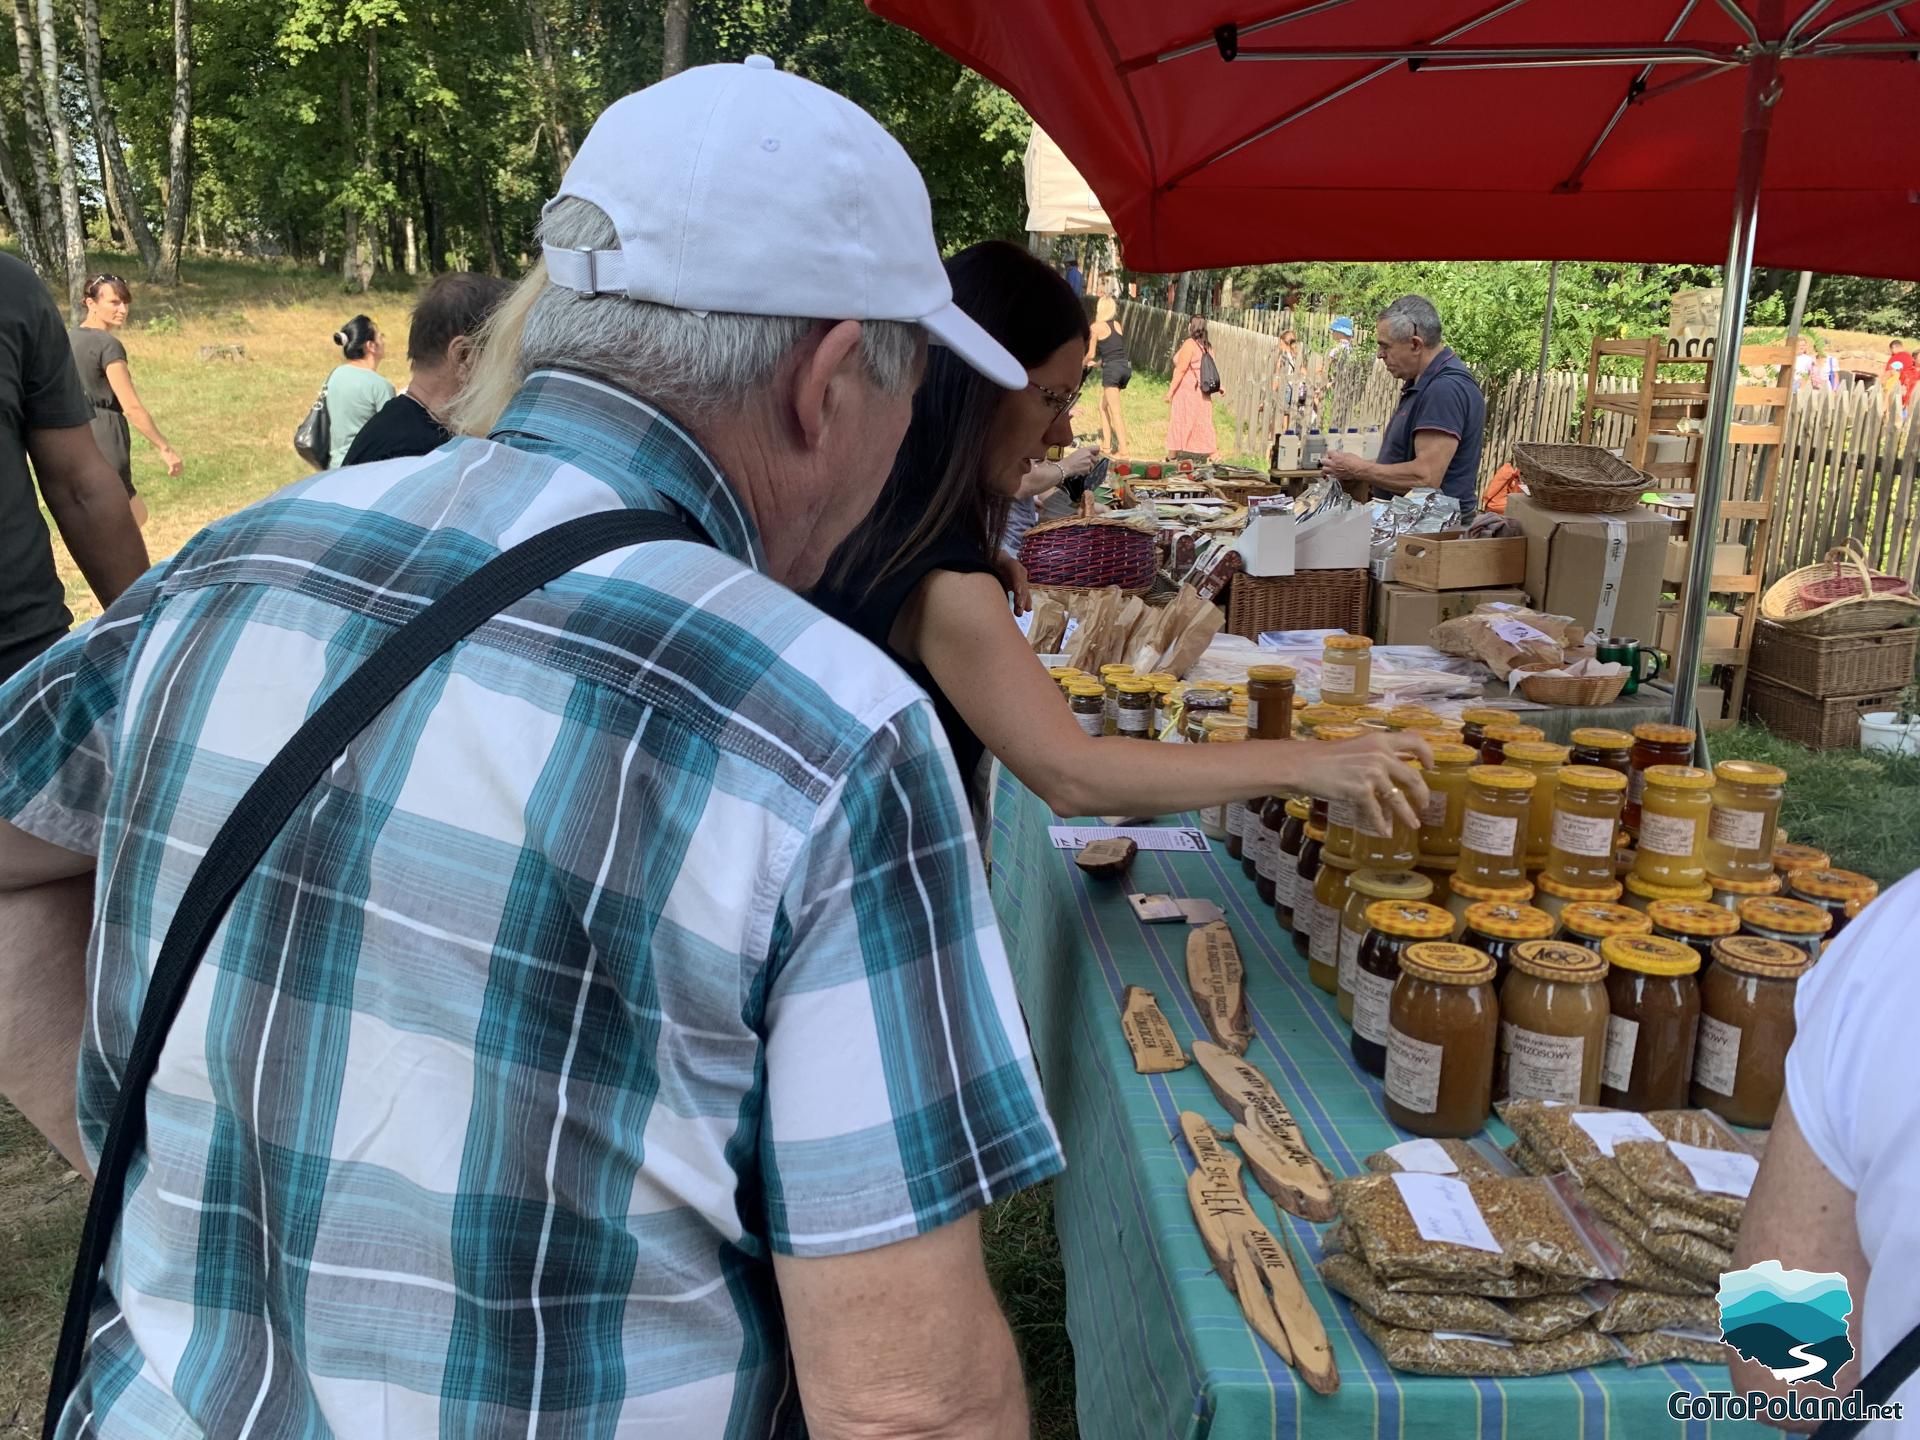 people watching products like jars of honey standing on a stall